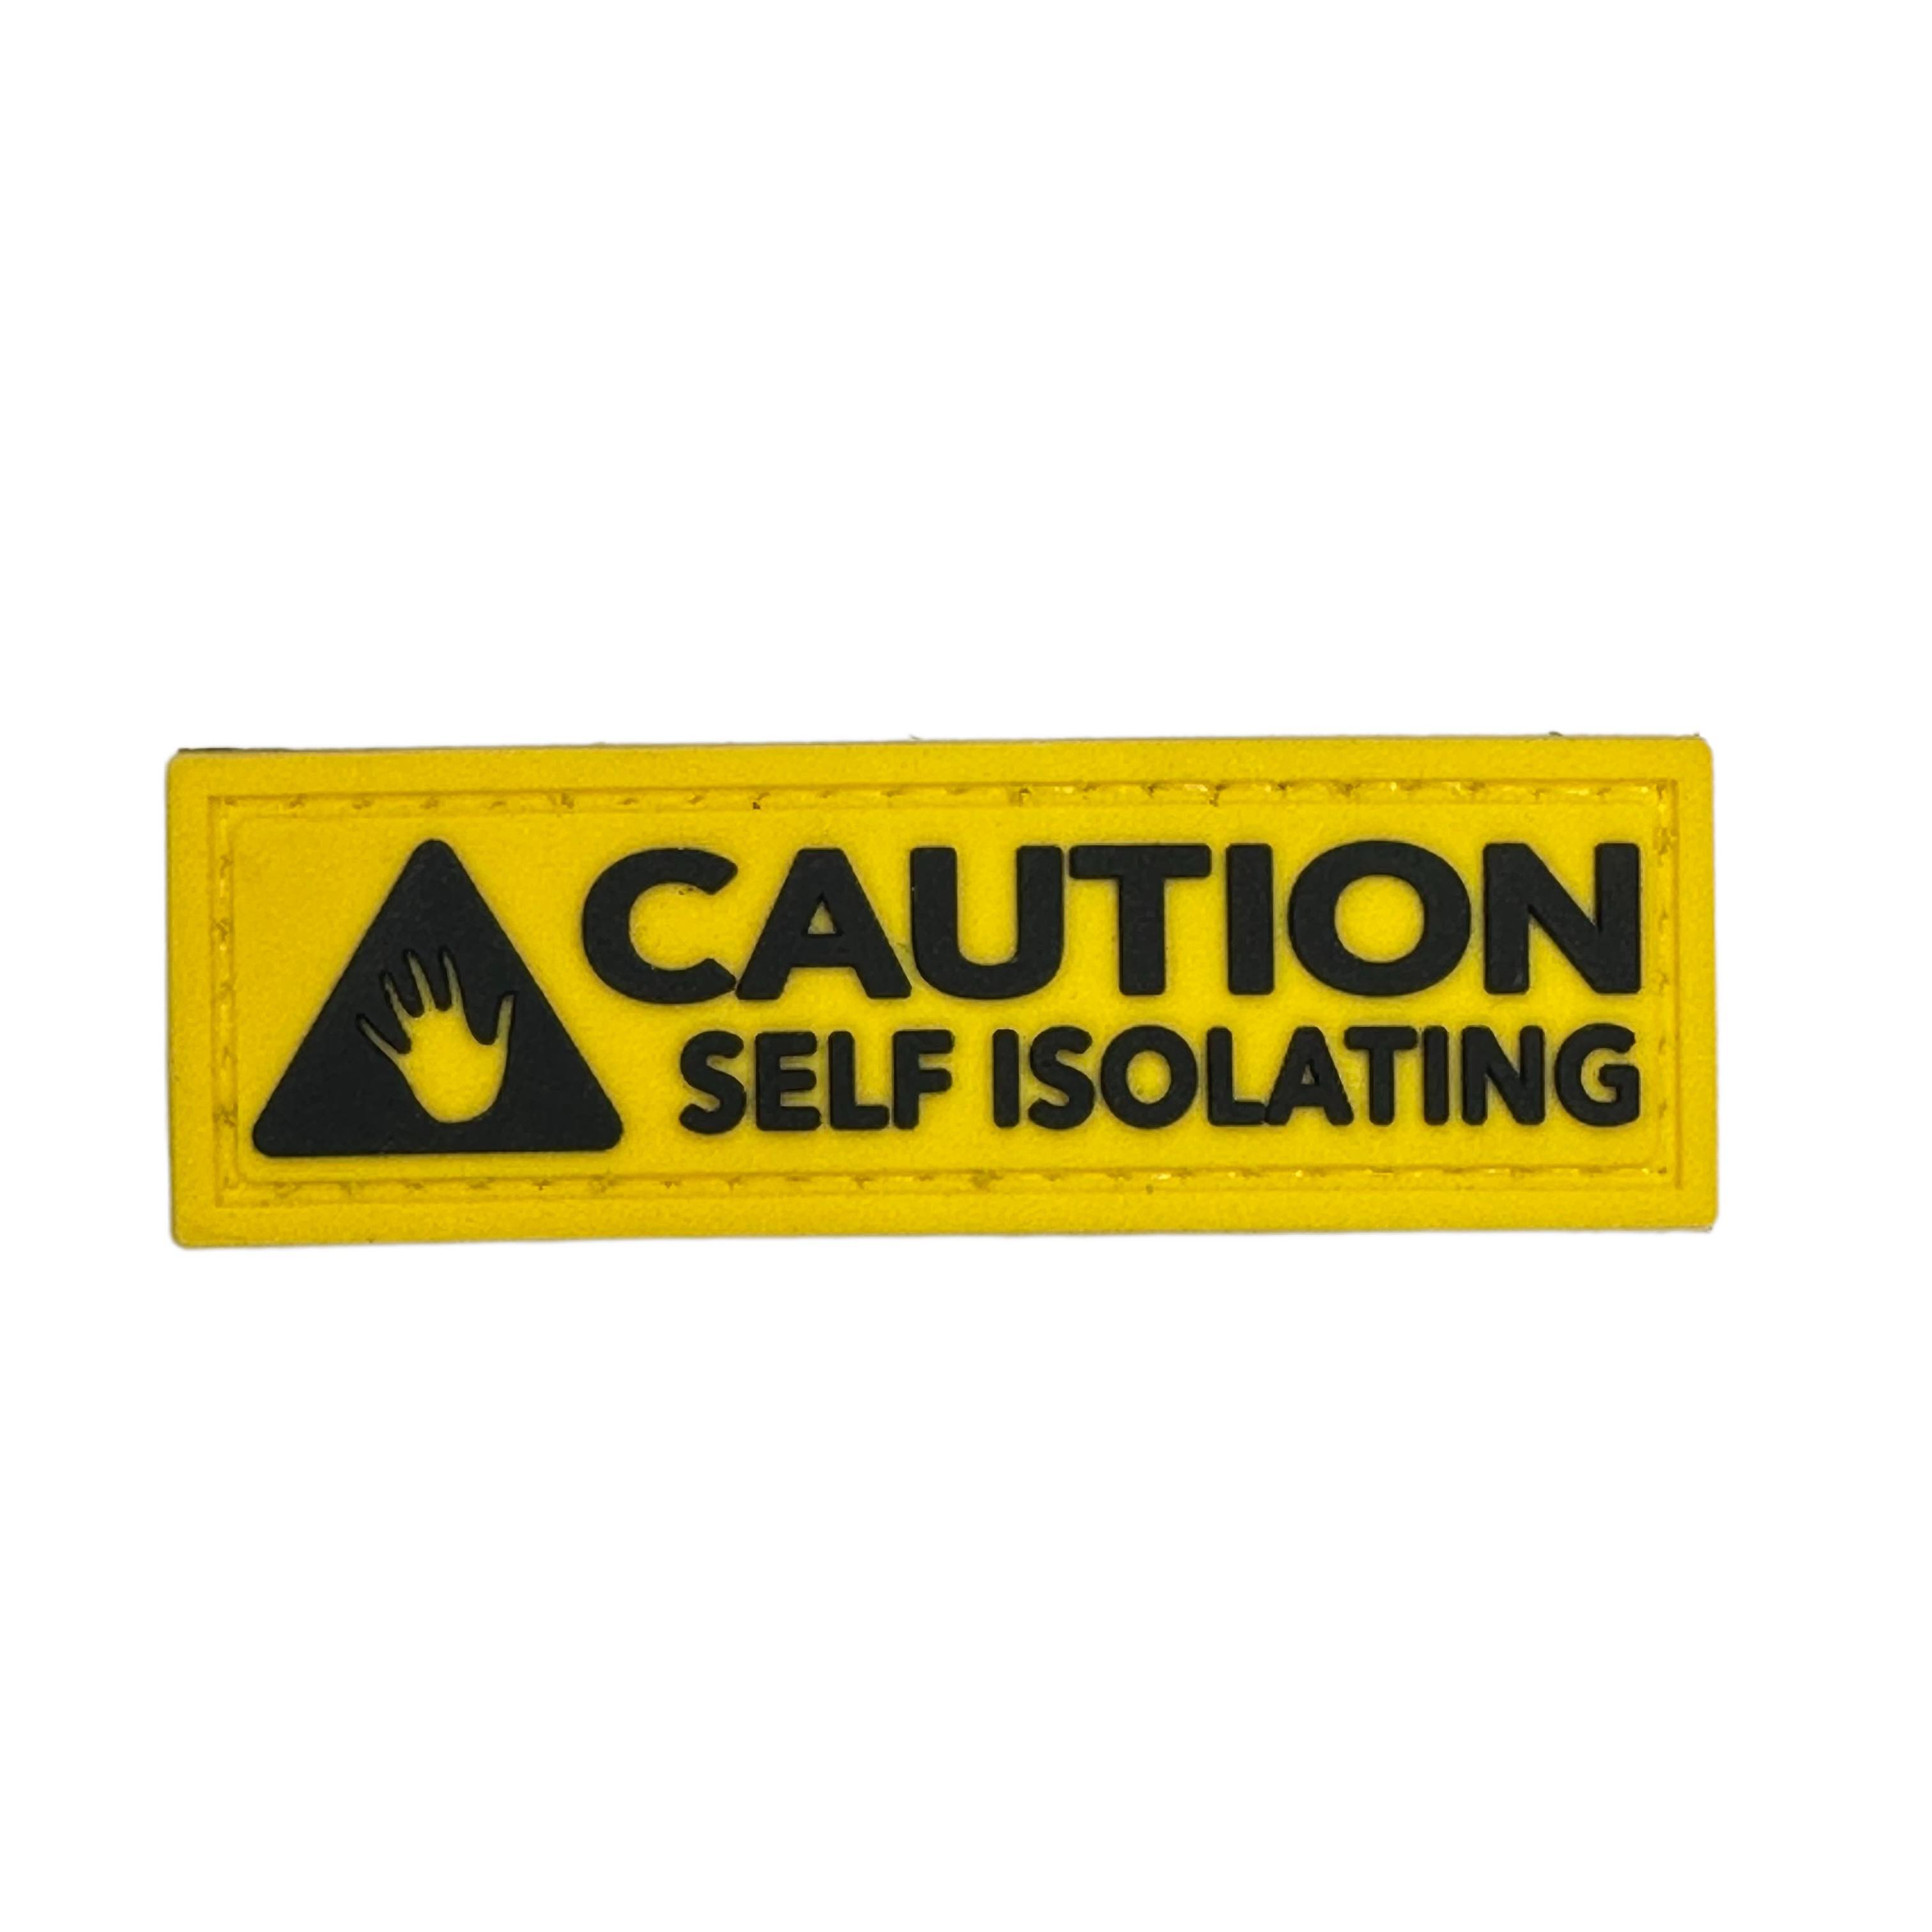 Rubber Patch - Caution Self Isolating